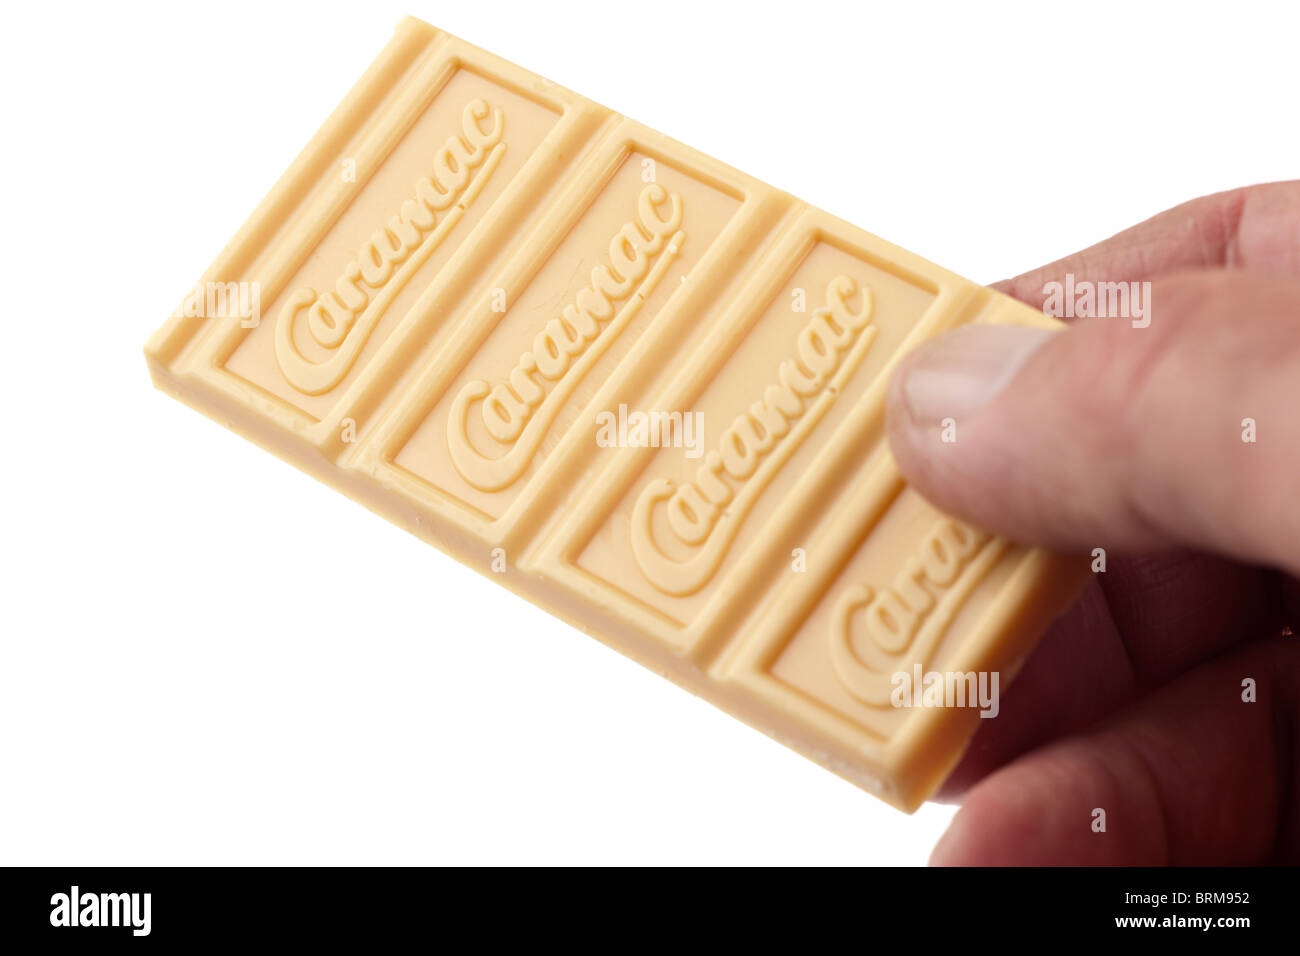 Bar of Nestle Caramac white chocolate being handed out Stock Photo